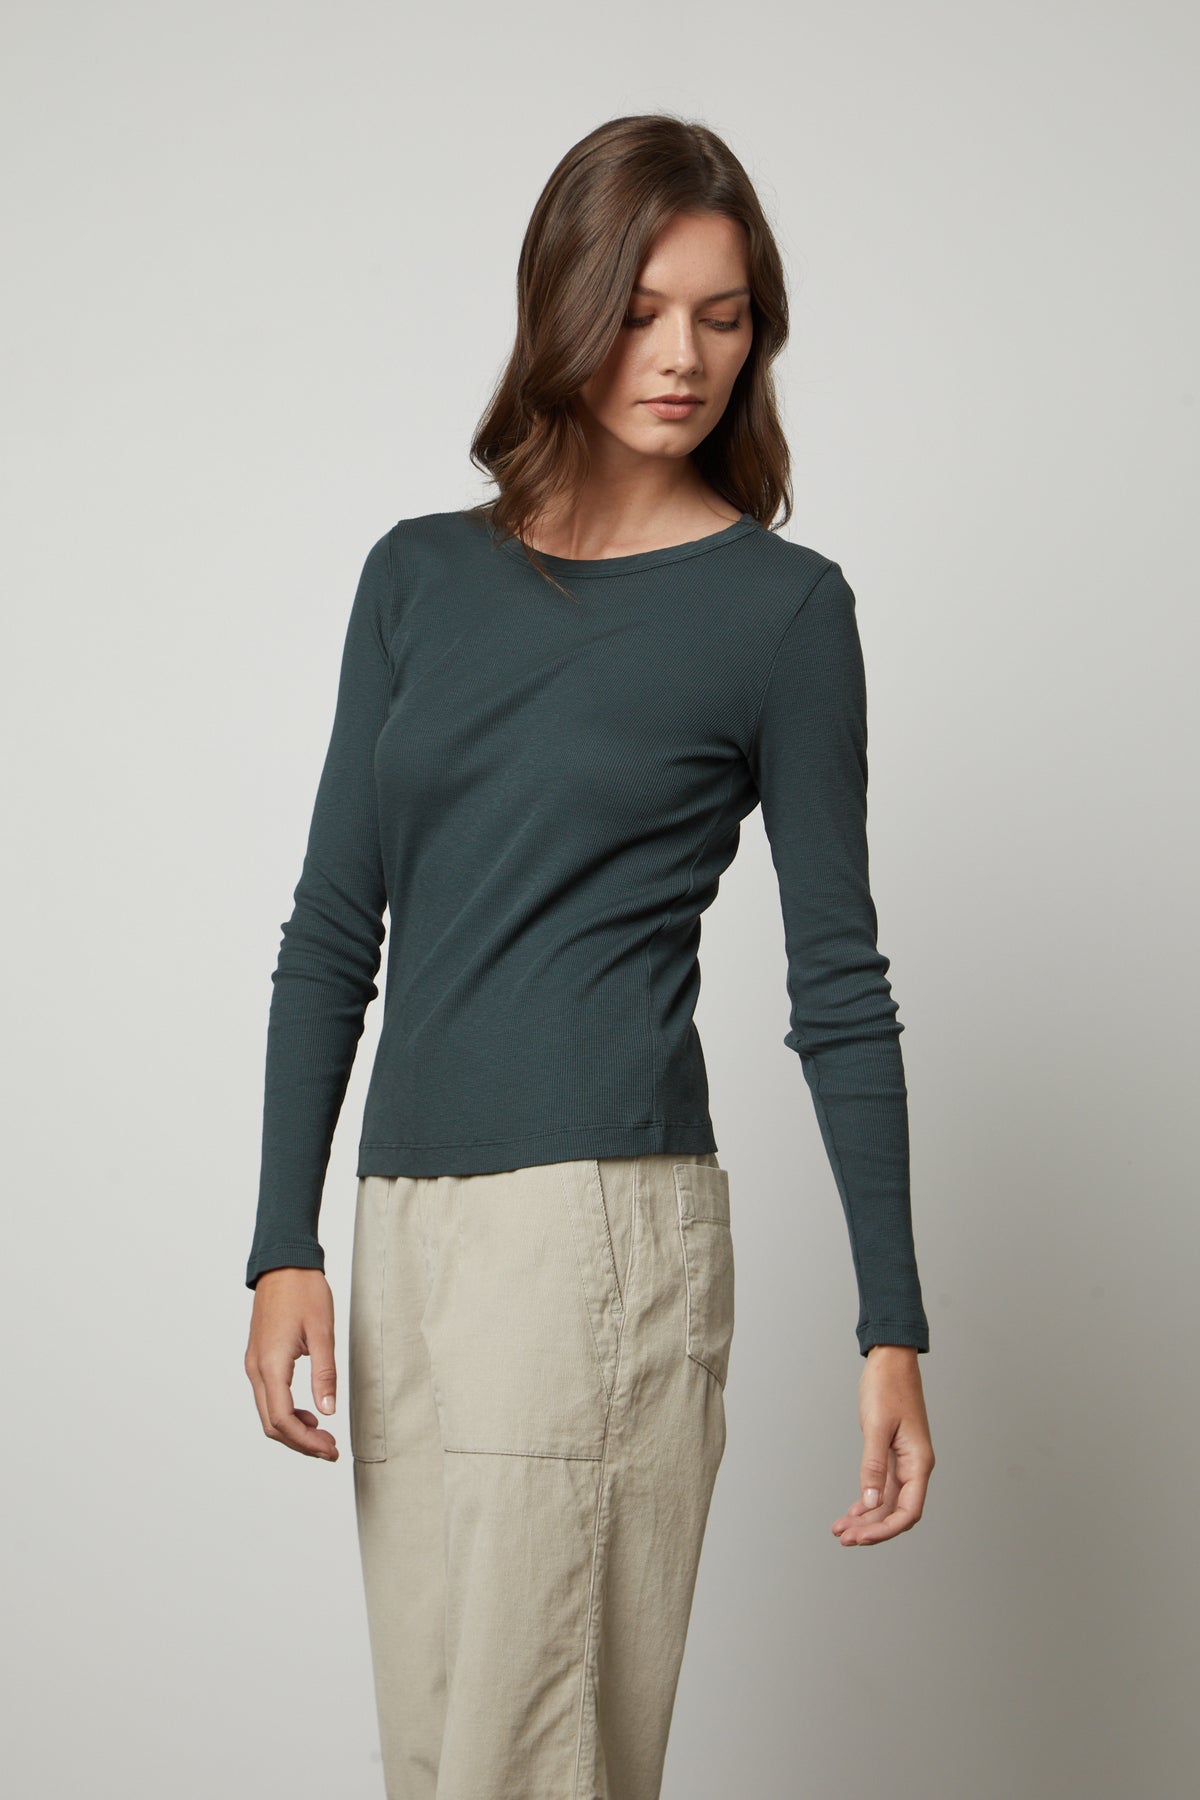   The model is wearing a Velvet by Graham & Spencer BAYLER RIBBED SCOOP NECK TEE and khaki pants. 